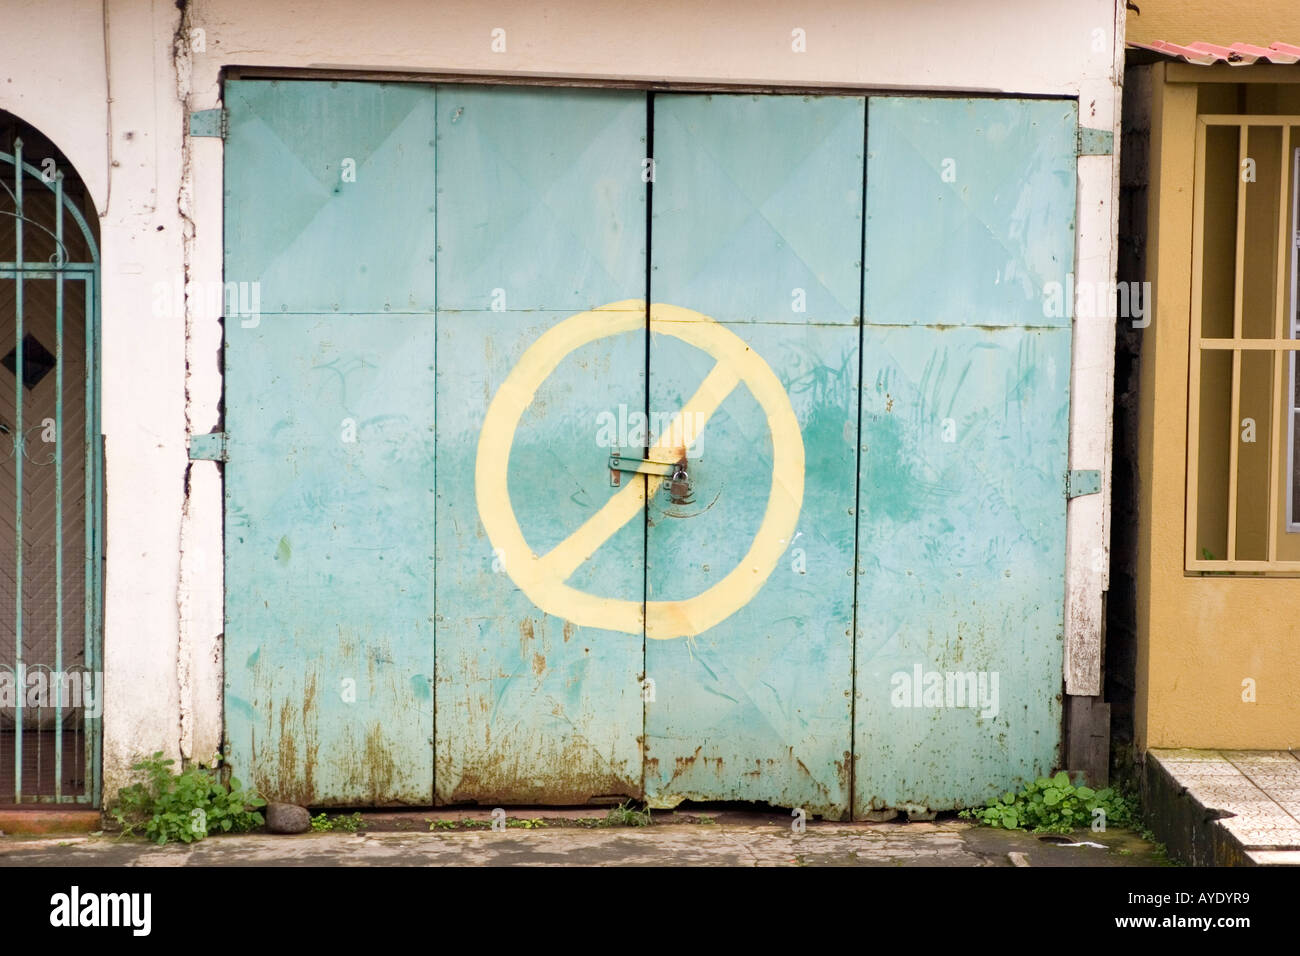 No Parking. A private garage in San Ramon Costa Rica with a sign meaning No Parking Stock Photo